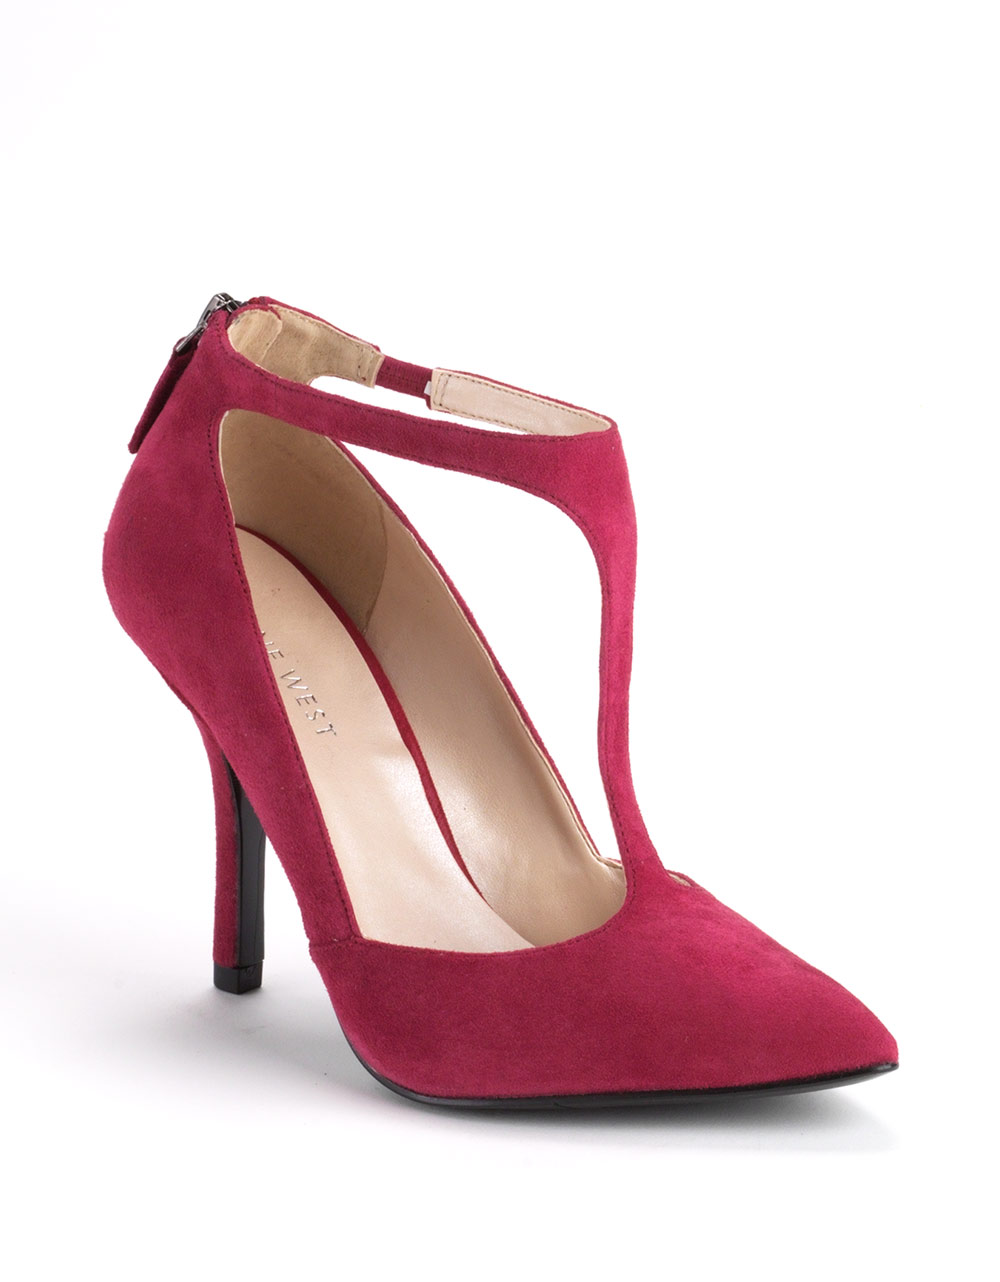 Nine West Blonsky T-Strap Suede Pumps in Red (red suede) | Lyst